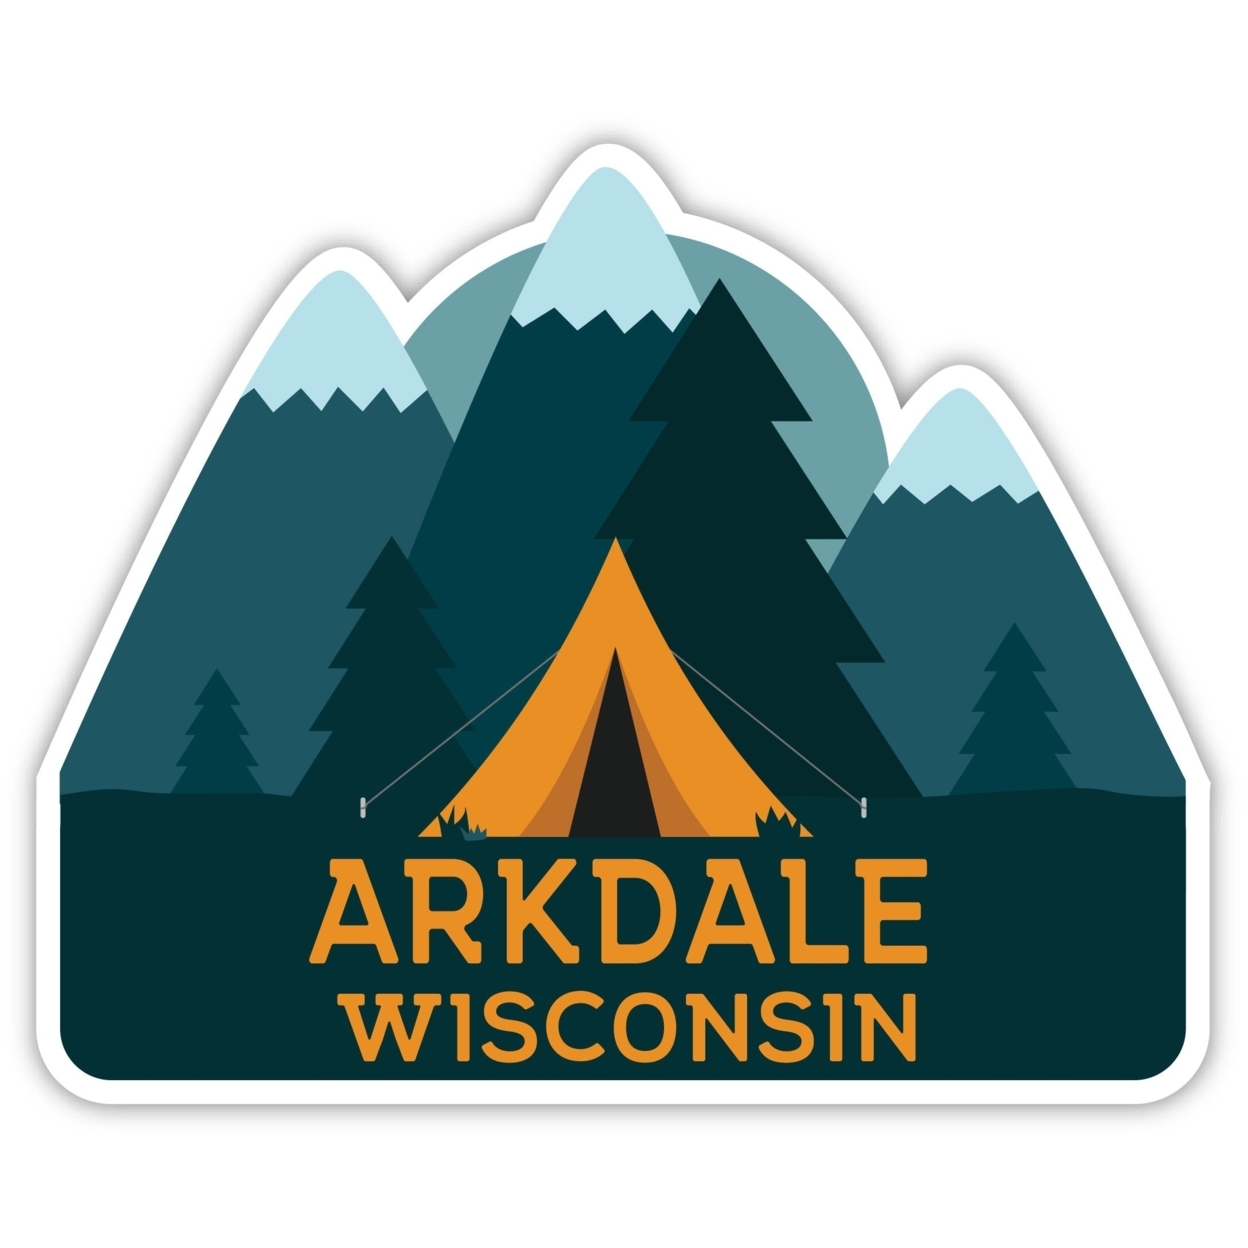 Arkdale Wisconsin Souvenir Decorative Stickers (Choose Theme And Size) - Single Unit, 4-Inch, Tent